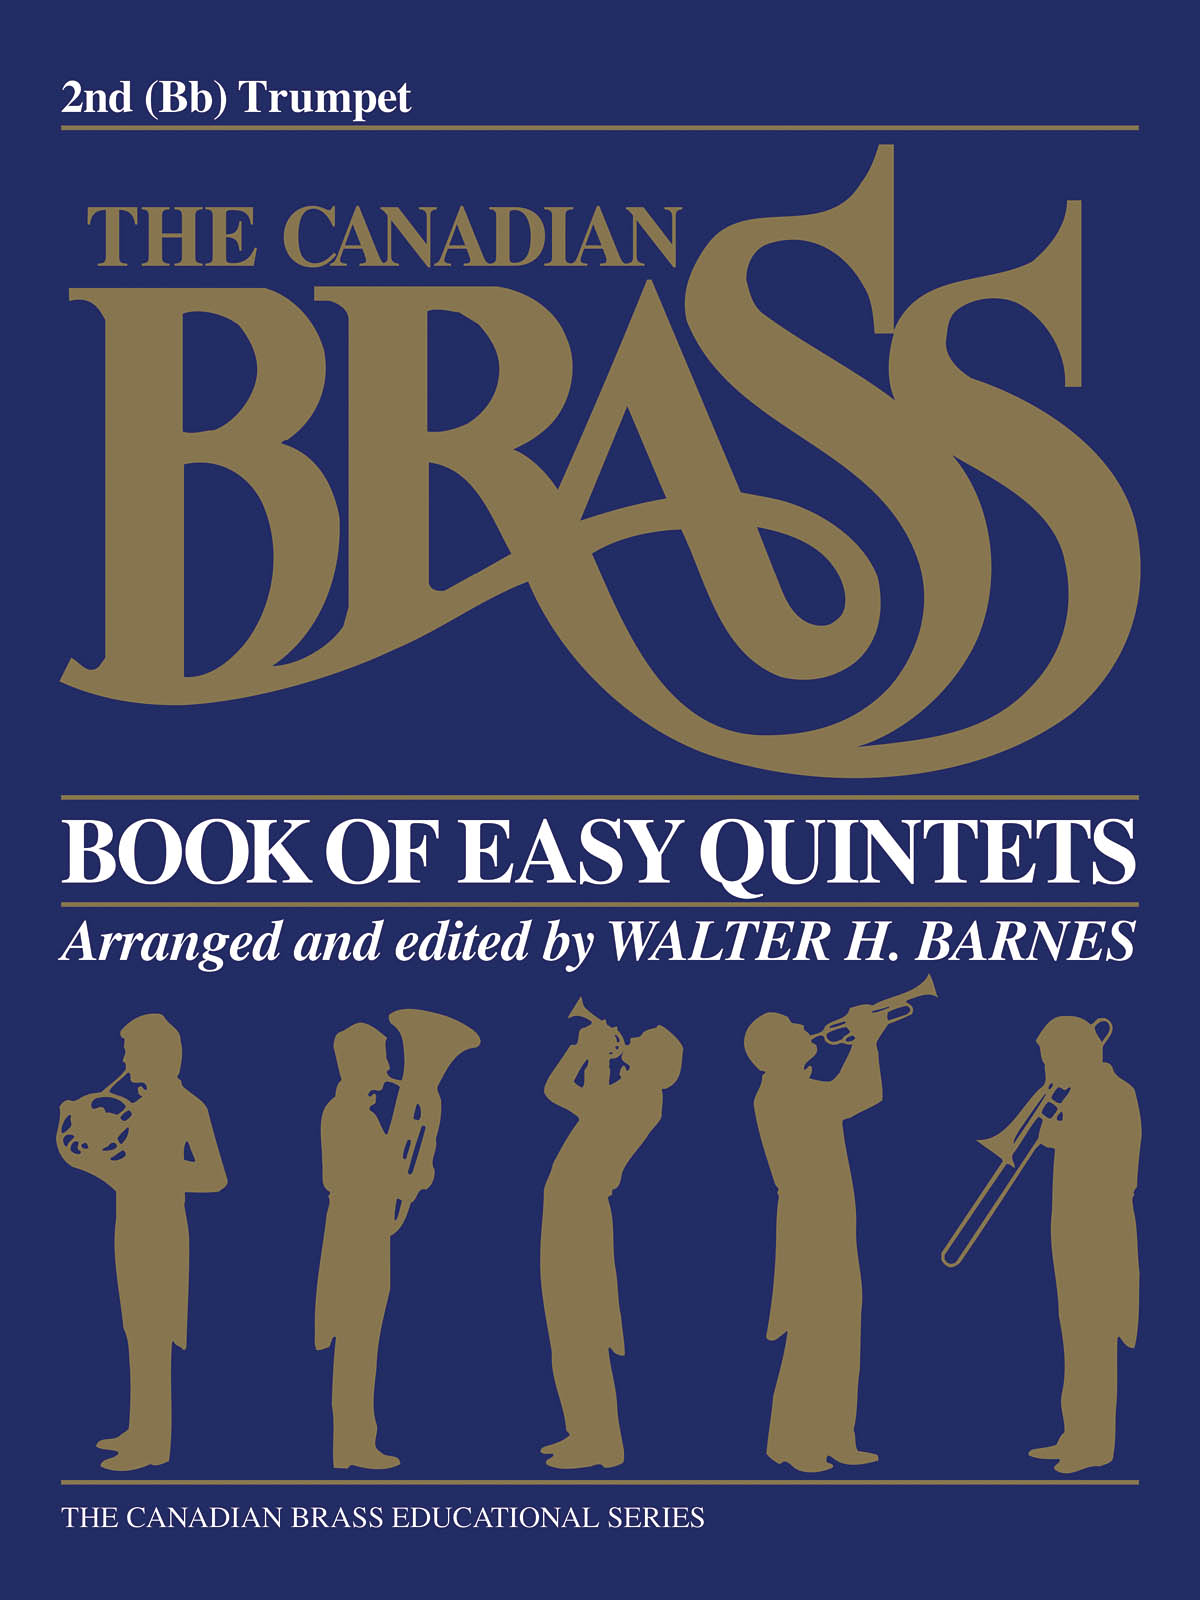 The Canadian Brass: The Canadian Brass Book of Easy Quintets: Trumpet: Part